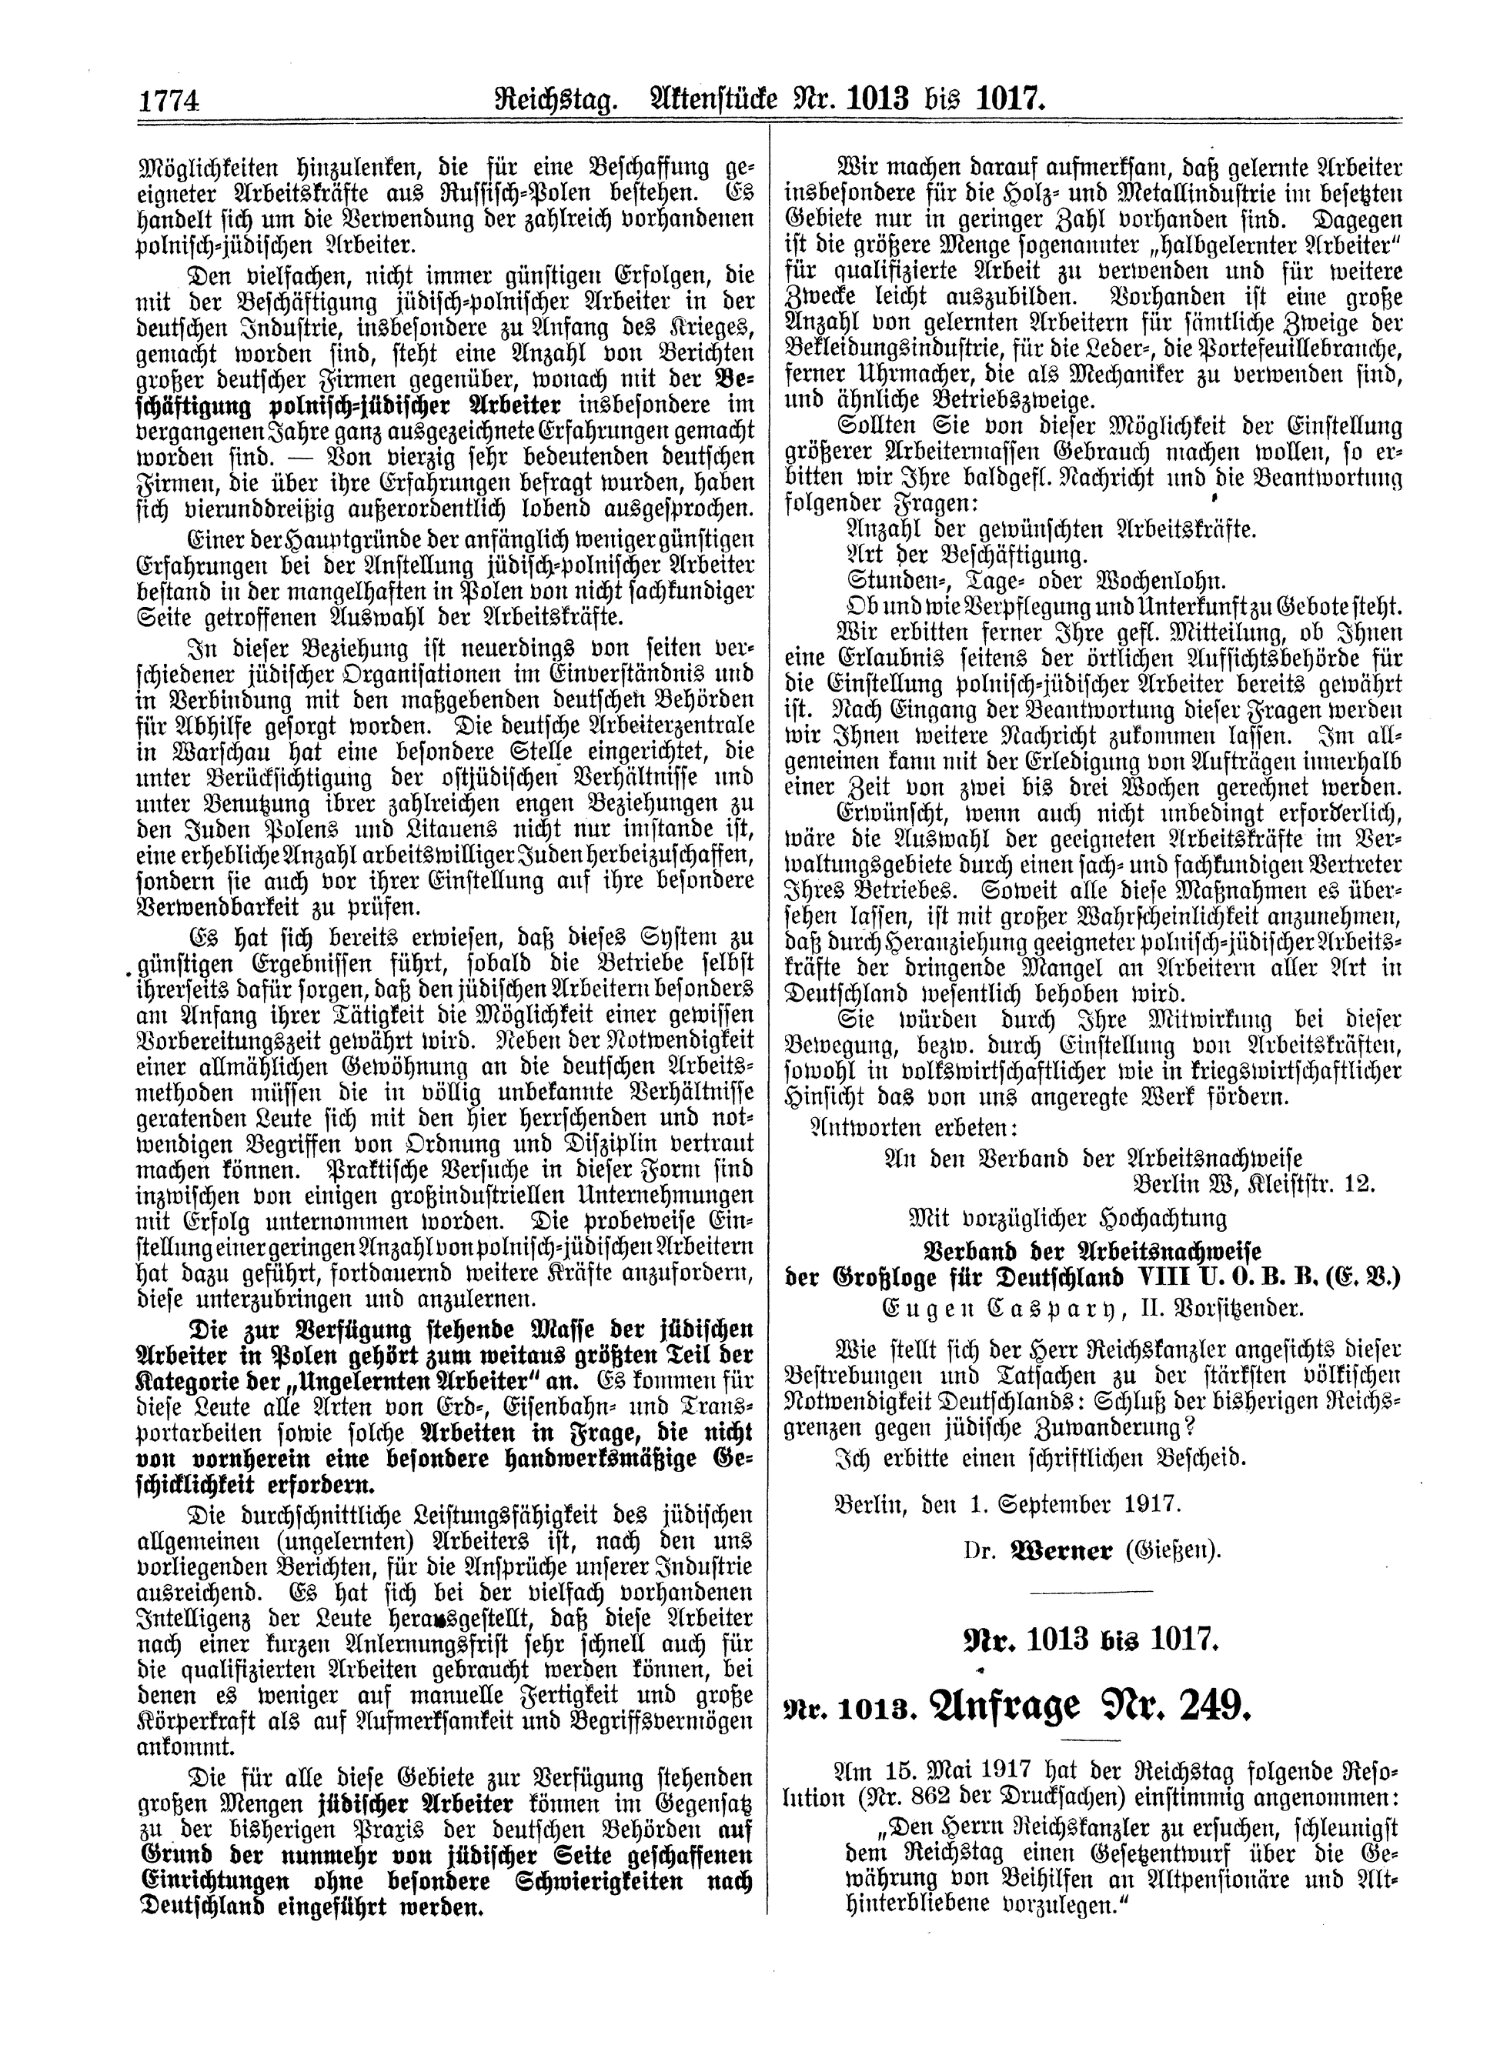 Scan of page 1774